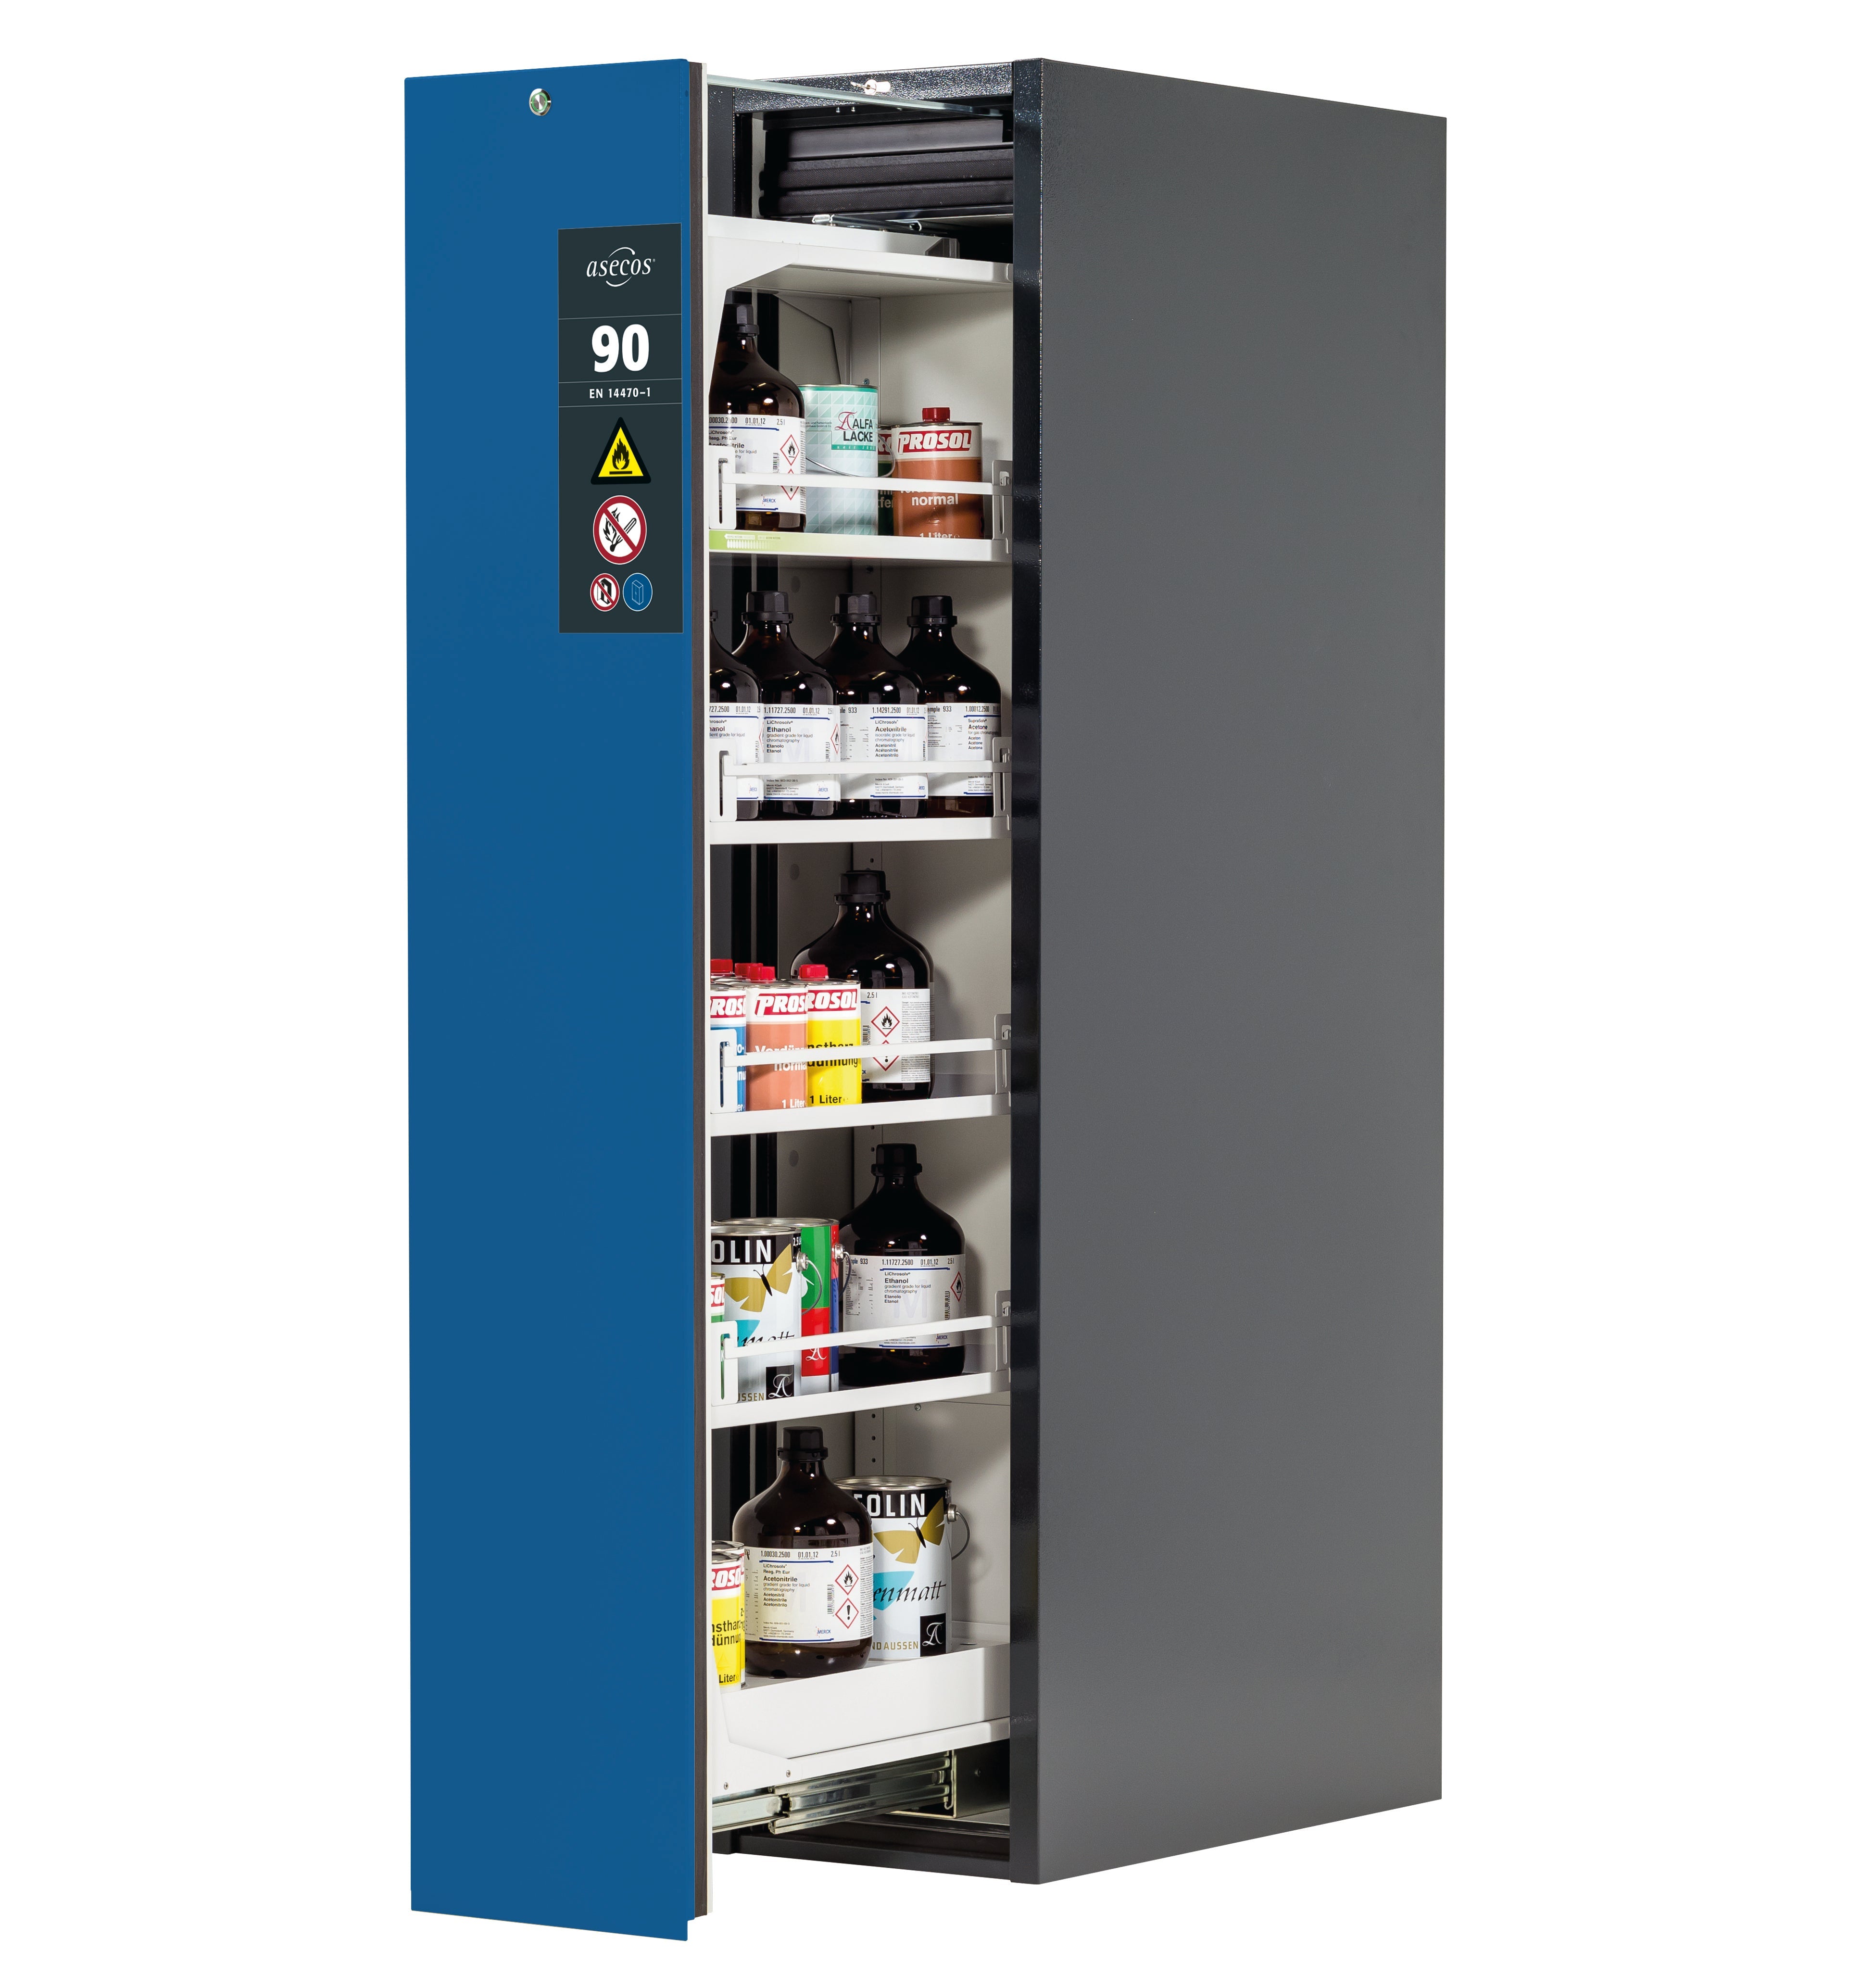 Type 90 safety cabinet V-MOVE-90 model V90.196.045.VDAC:0013 in gentian blue RAL 5010 with 4x standard shelves (sheet steel)